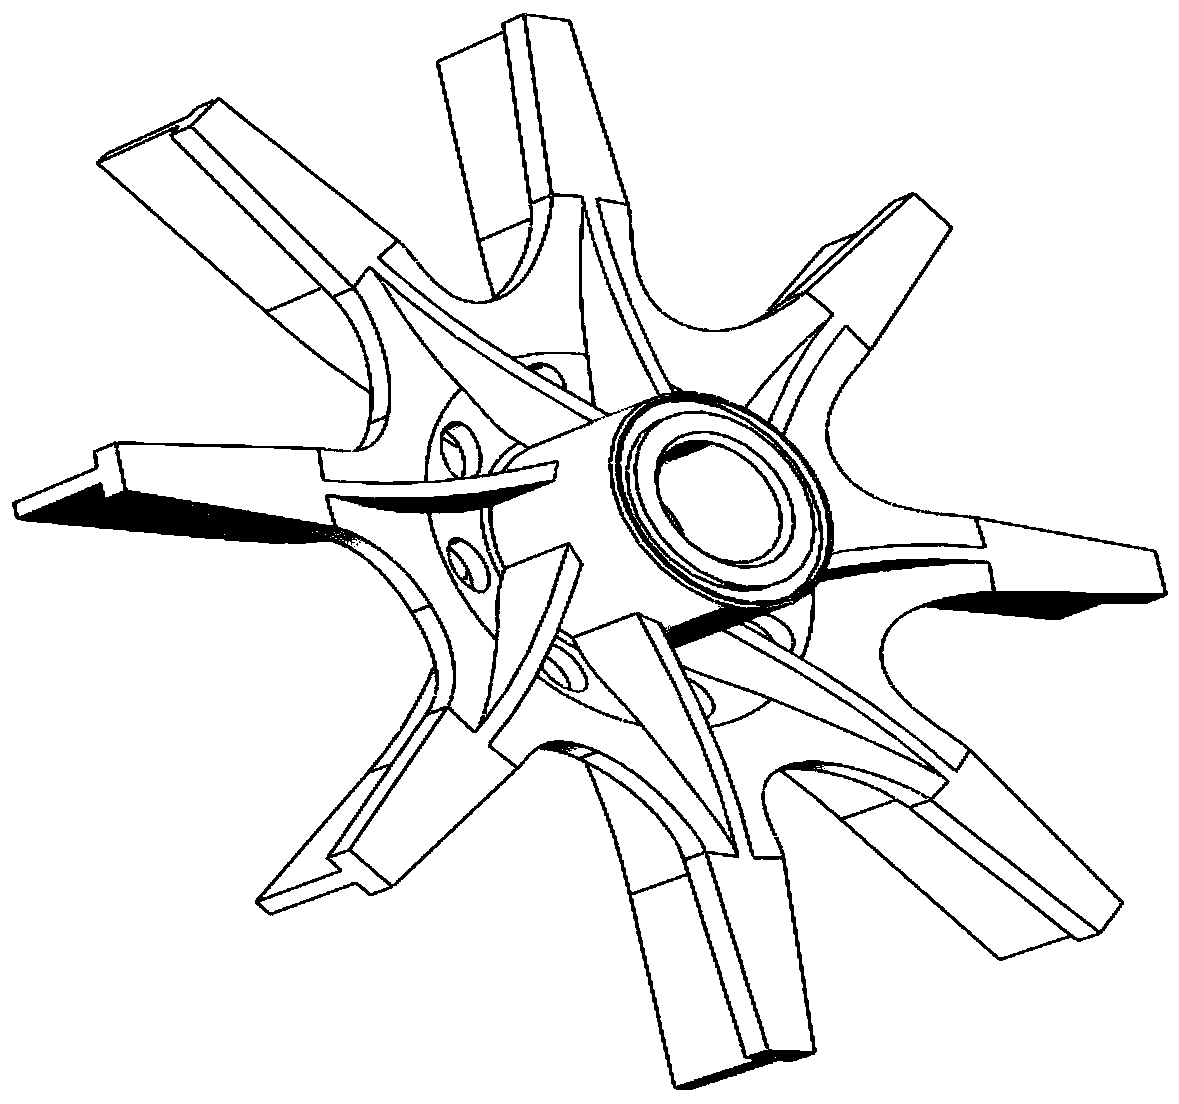 Open impeller structure for high-speed pump